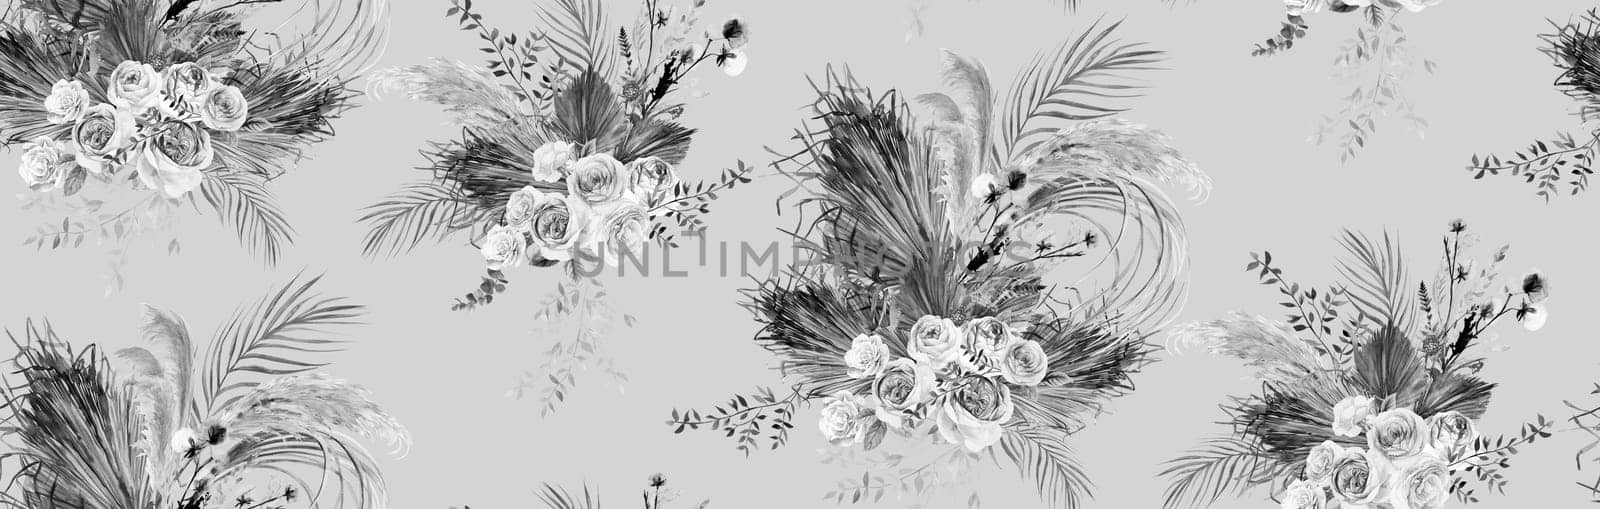 Watercolor blsck and white seamless pattern in boho style with botanical composition of dried flowers with palm leaves and delicate rose flowers